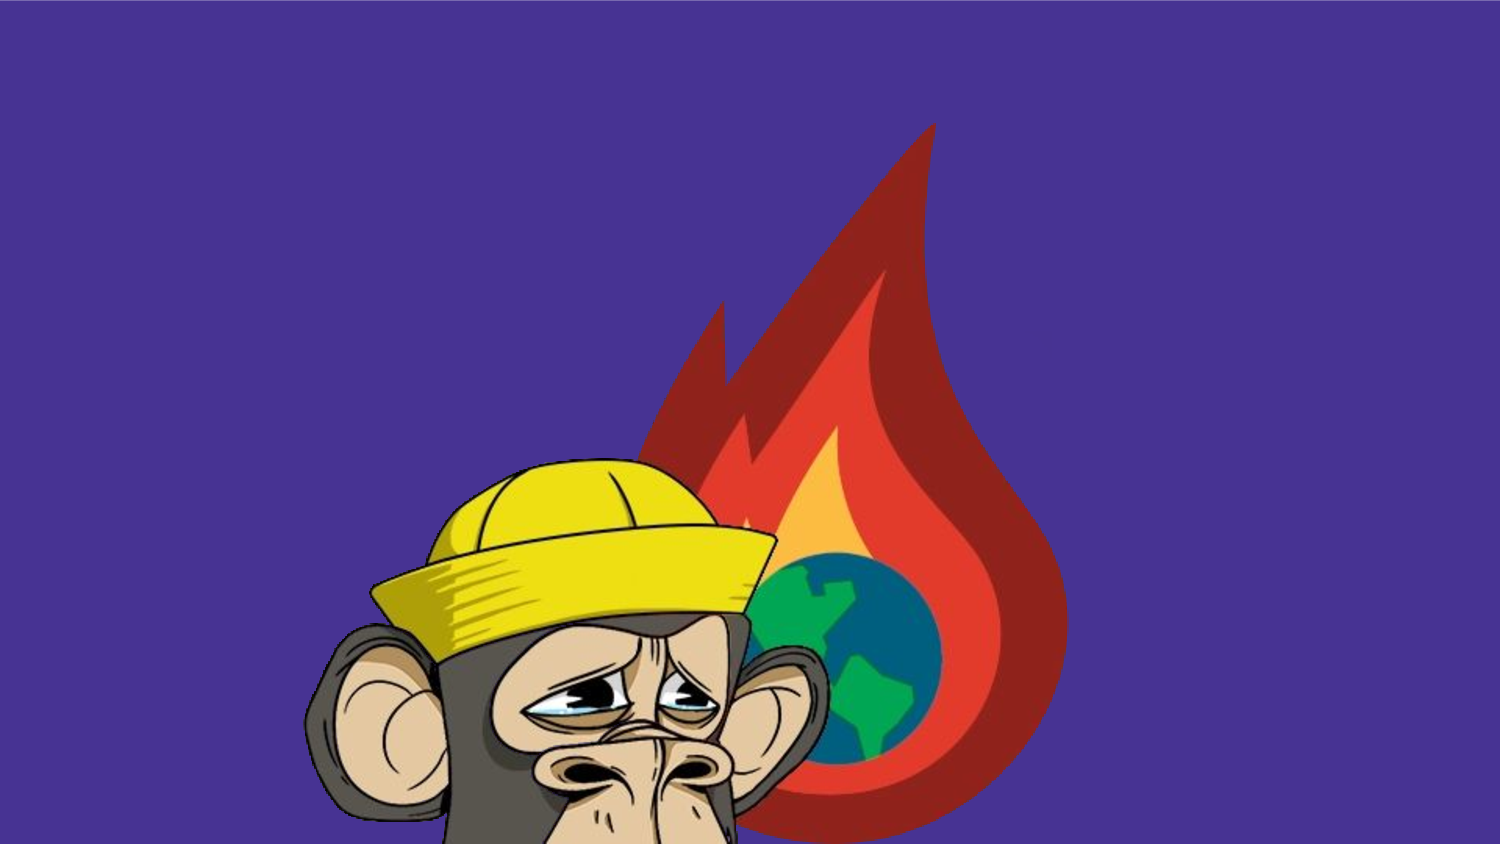 Purple slide with the Web3 is Going Great logo: a sad-looking Bored Ape with a yellow hat, in front of an illustration of the Earth encompassed in flames